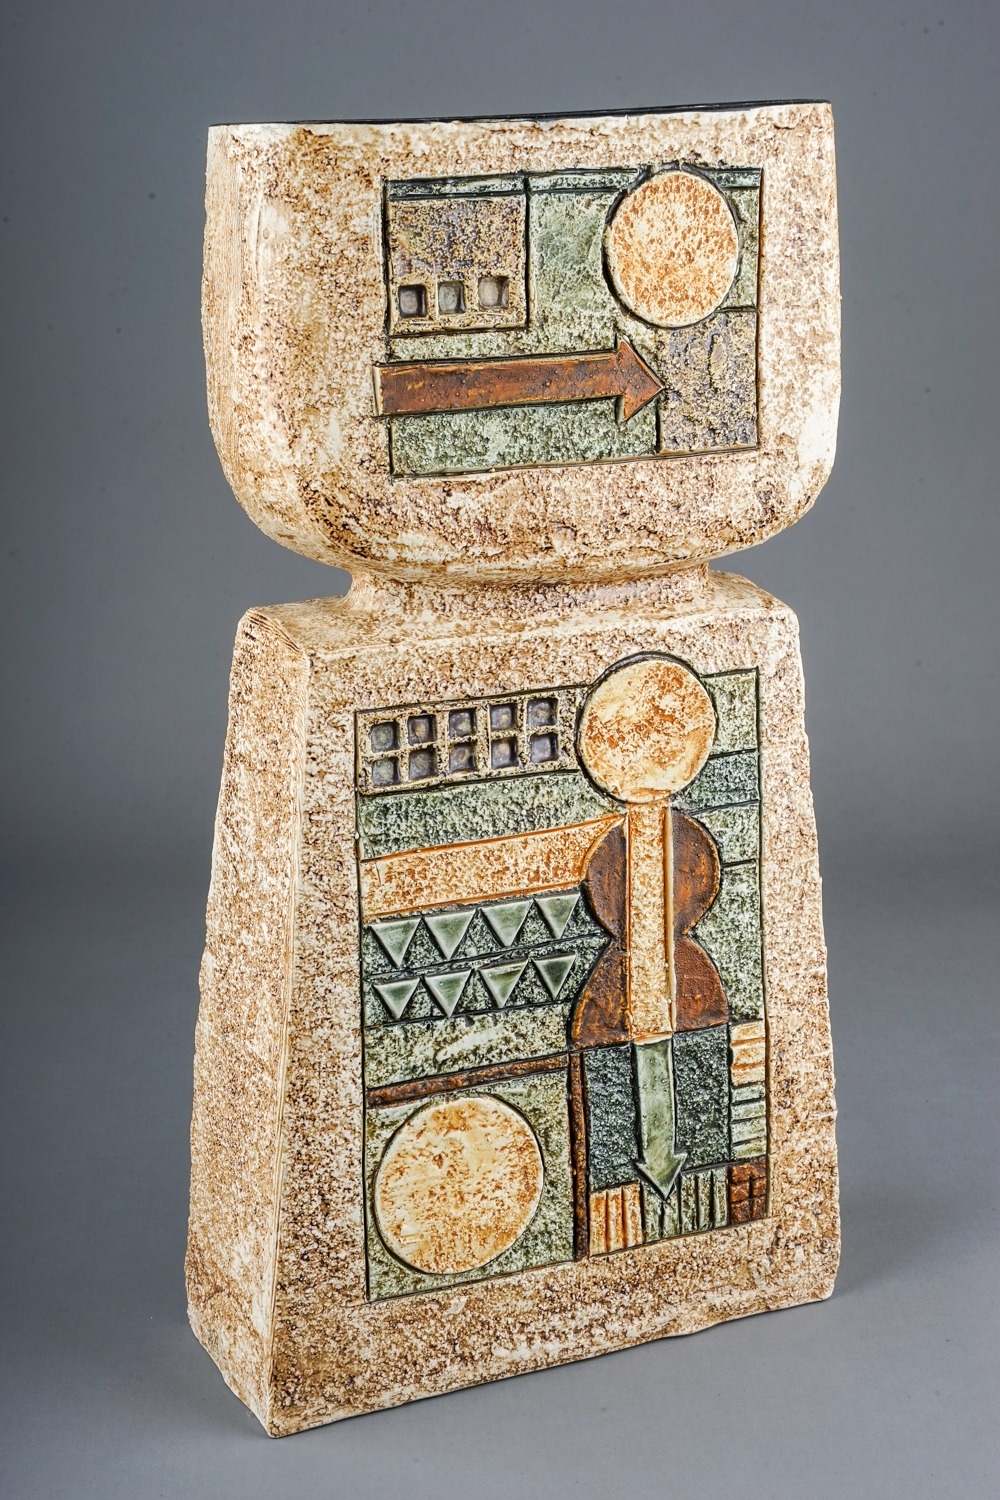 A Troika Pottery double base vase, cast in low relief with geometric panels in shades of ivory and - Image 3 of 8